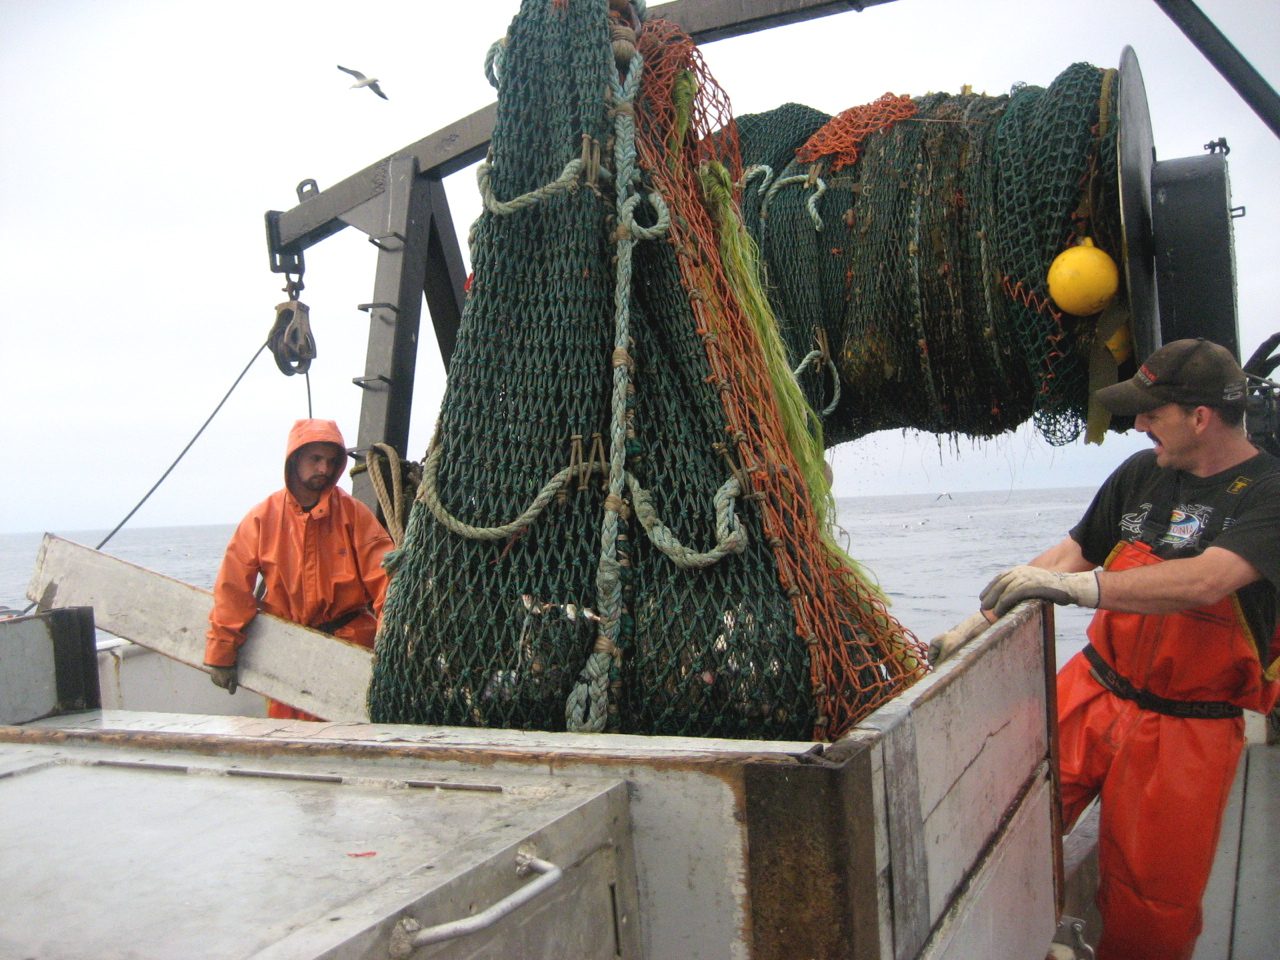 Traditional trawling methods